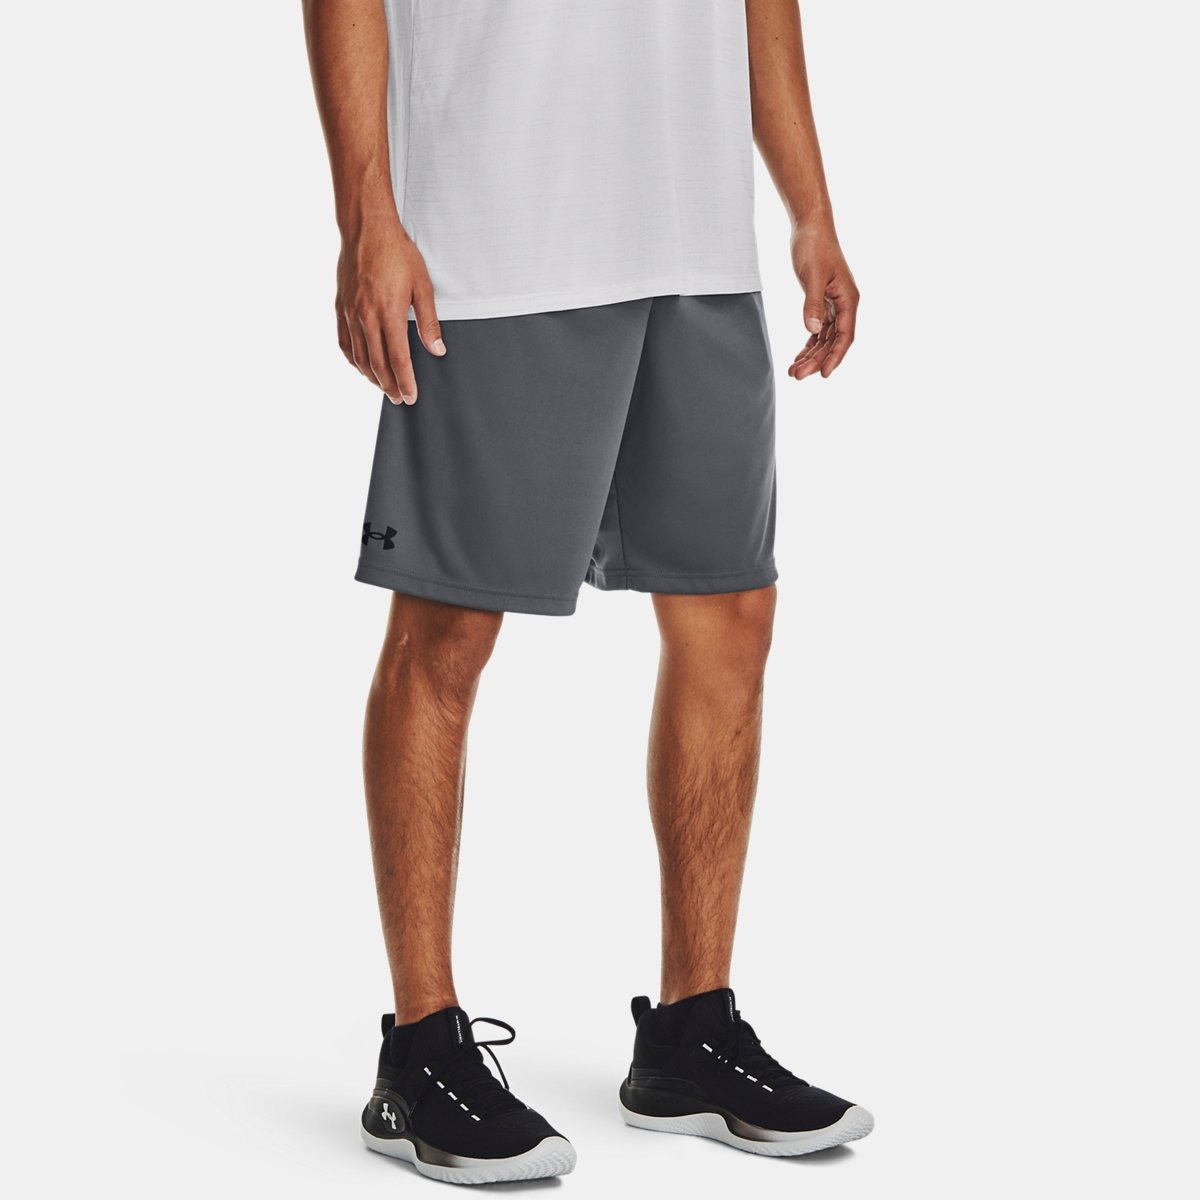 Grey Shorts for Men from Under Armour GOOFASH